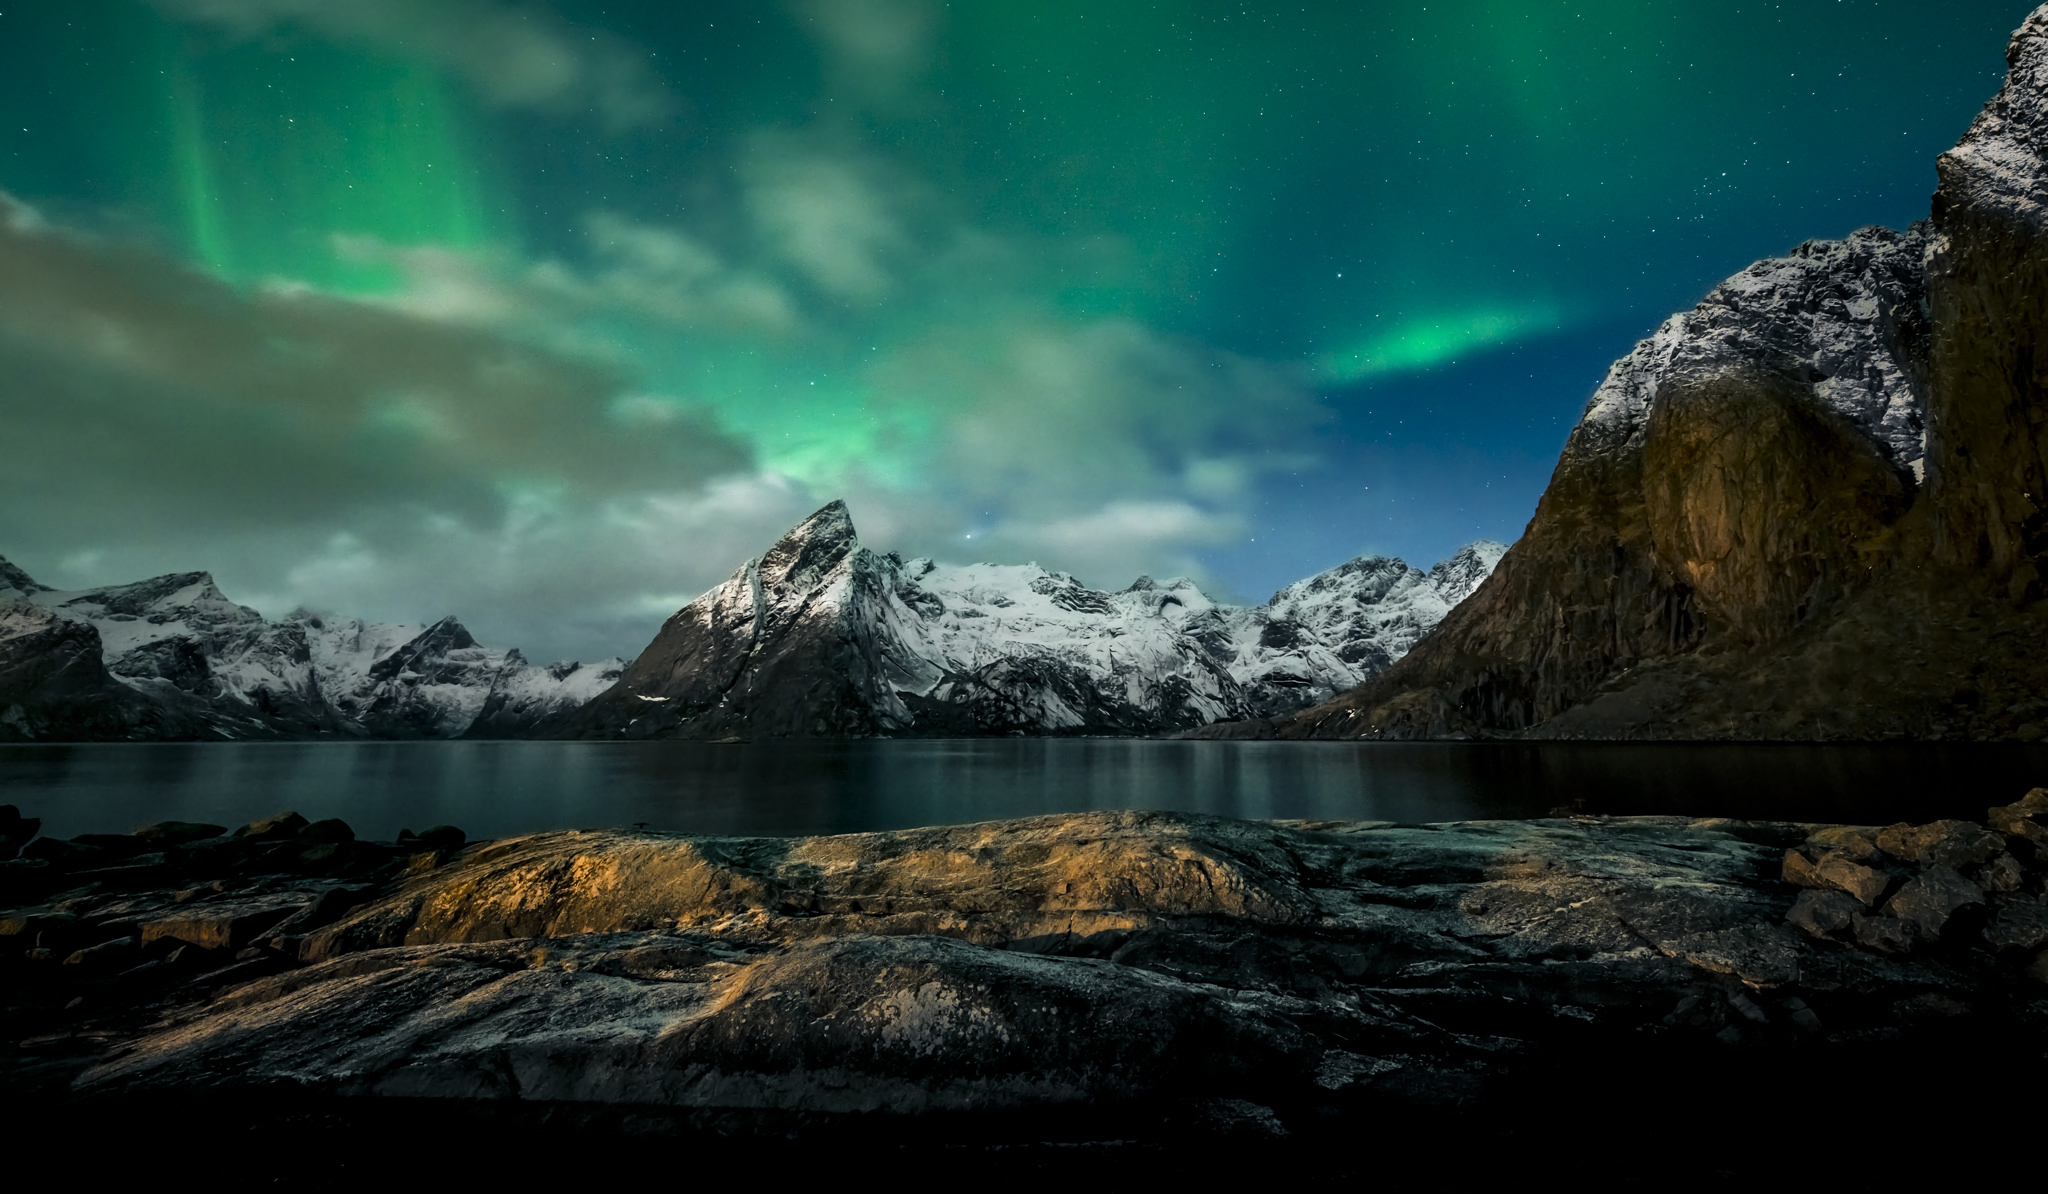 Northern Lights over Winter Mountains